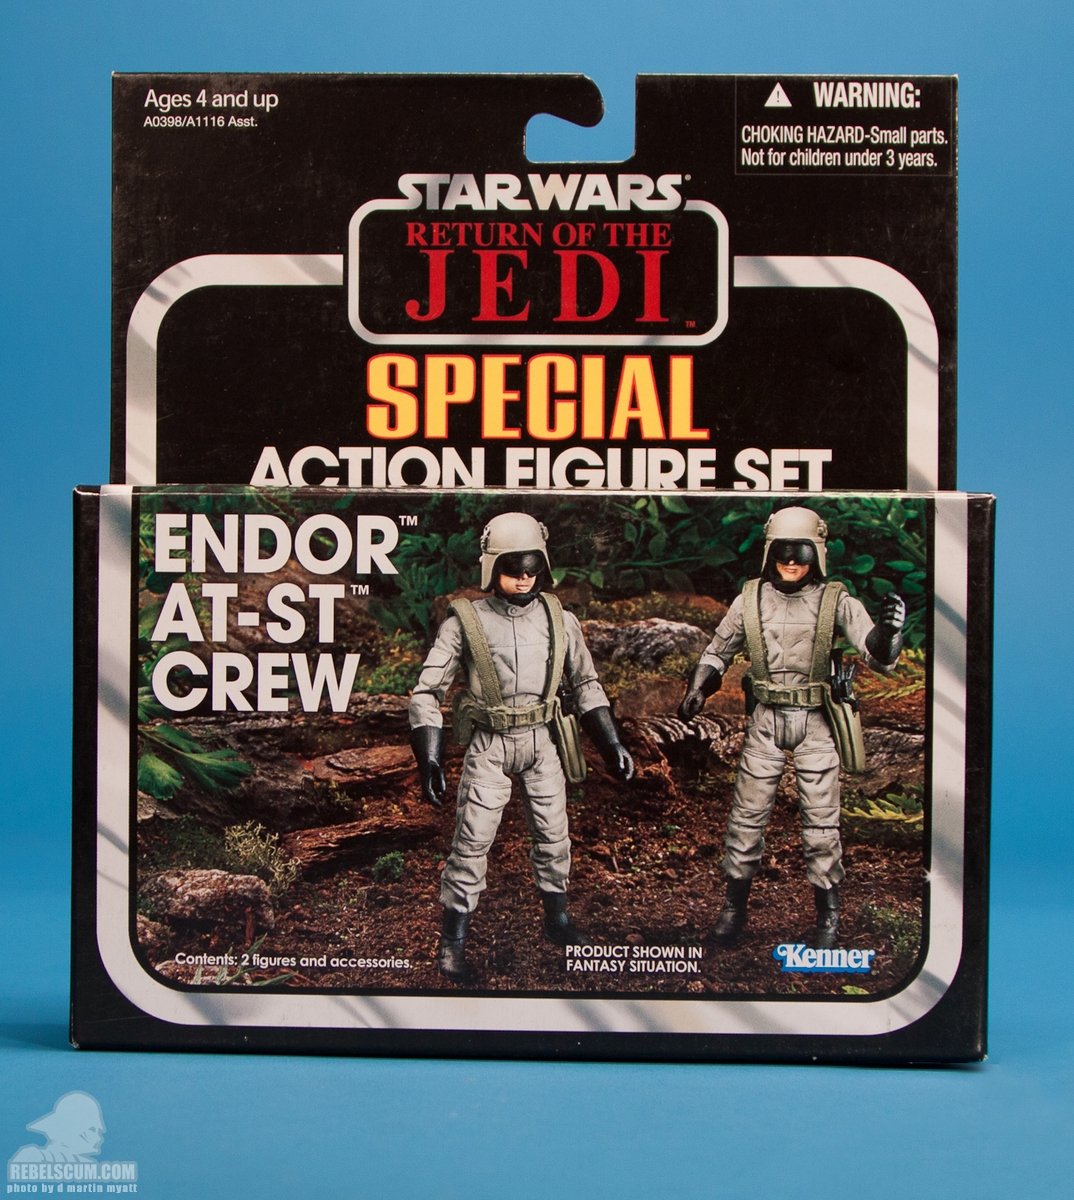 Endor_AT-ST_Crew_The_Vintage_Collection_TVC_Kmart-52.jpg